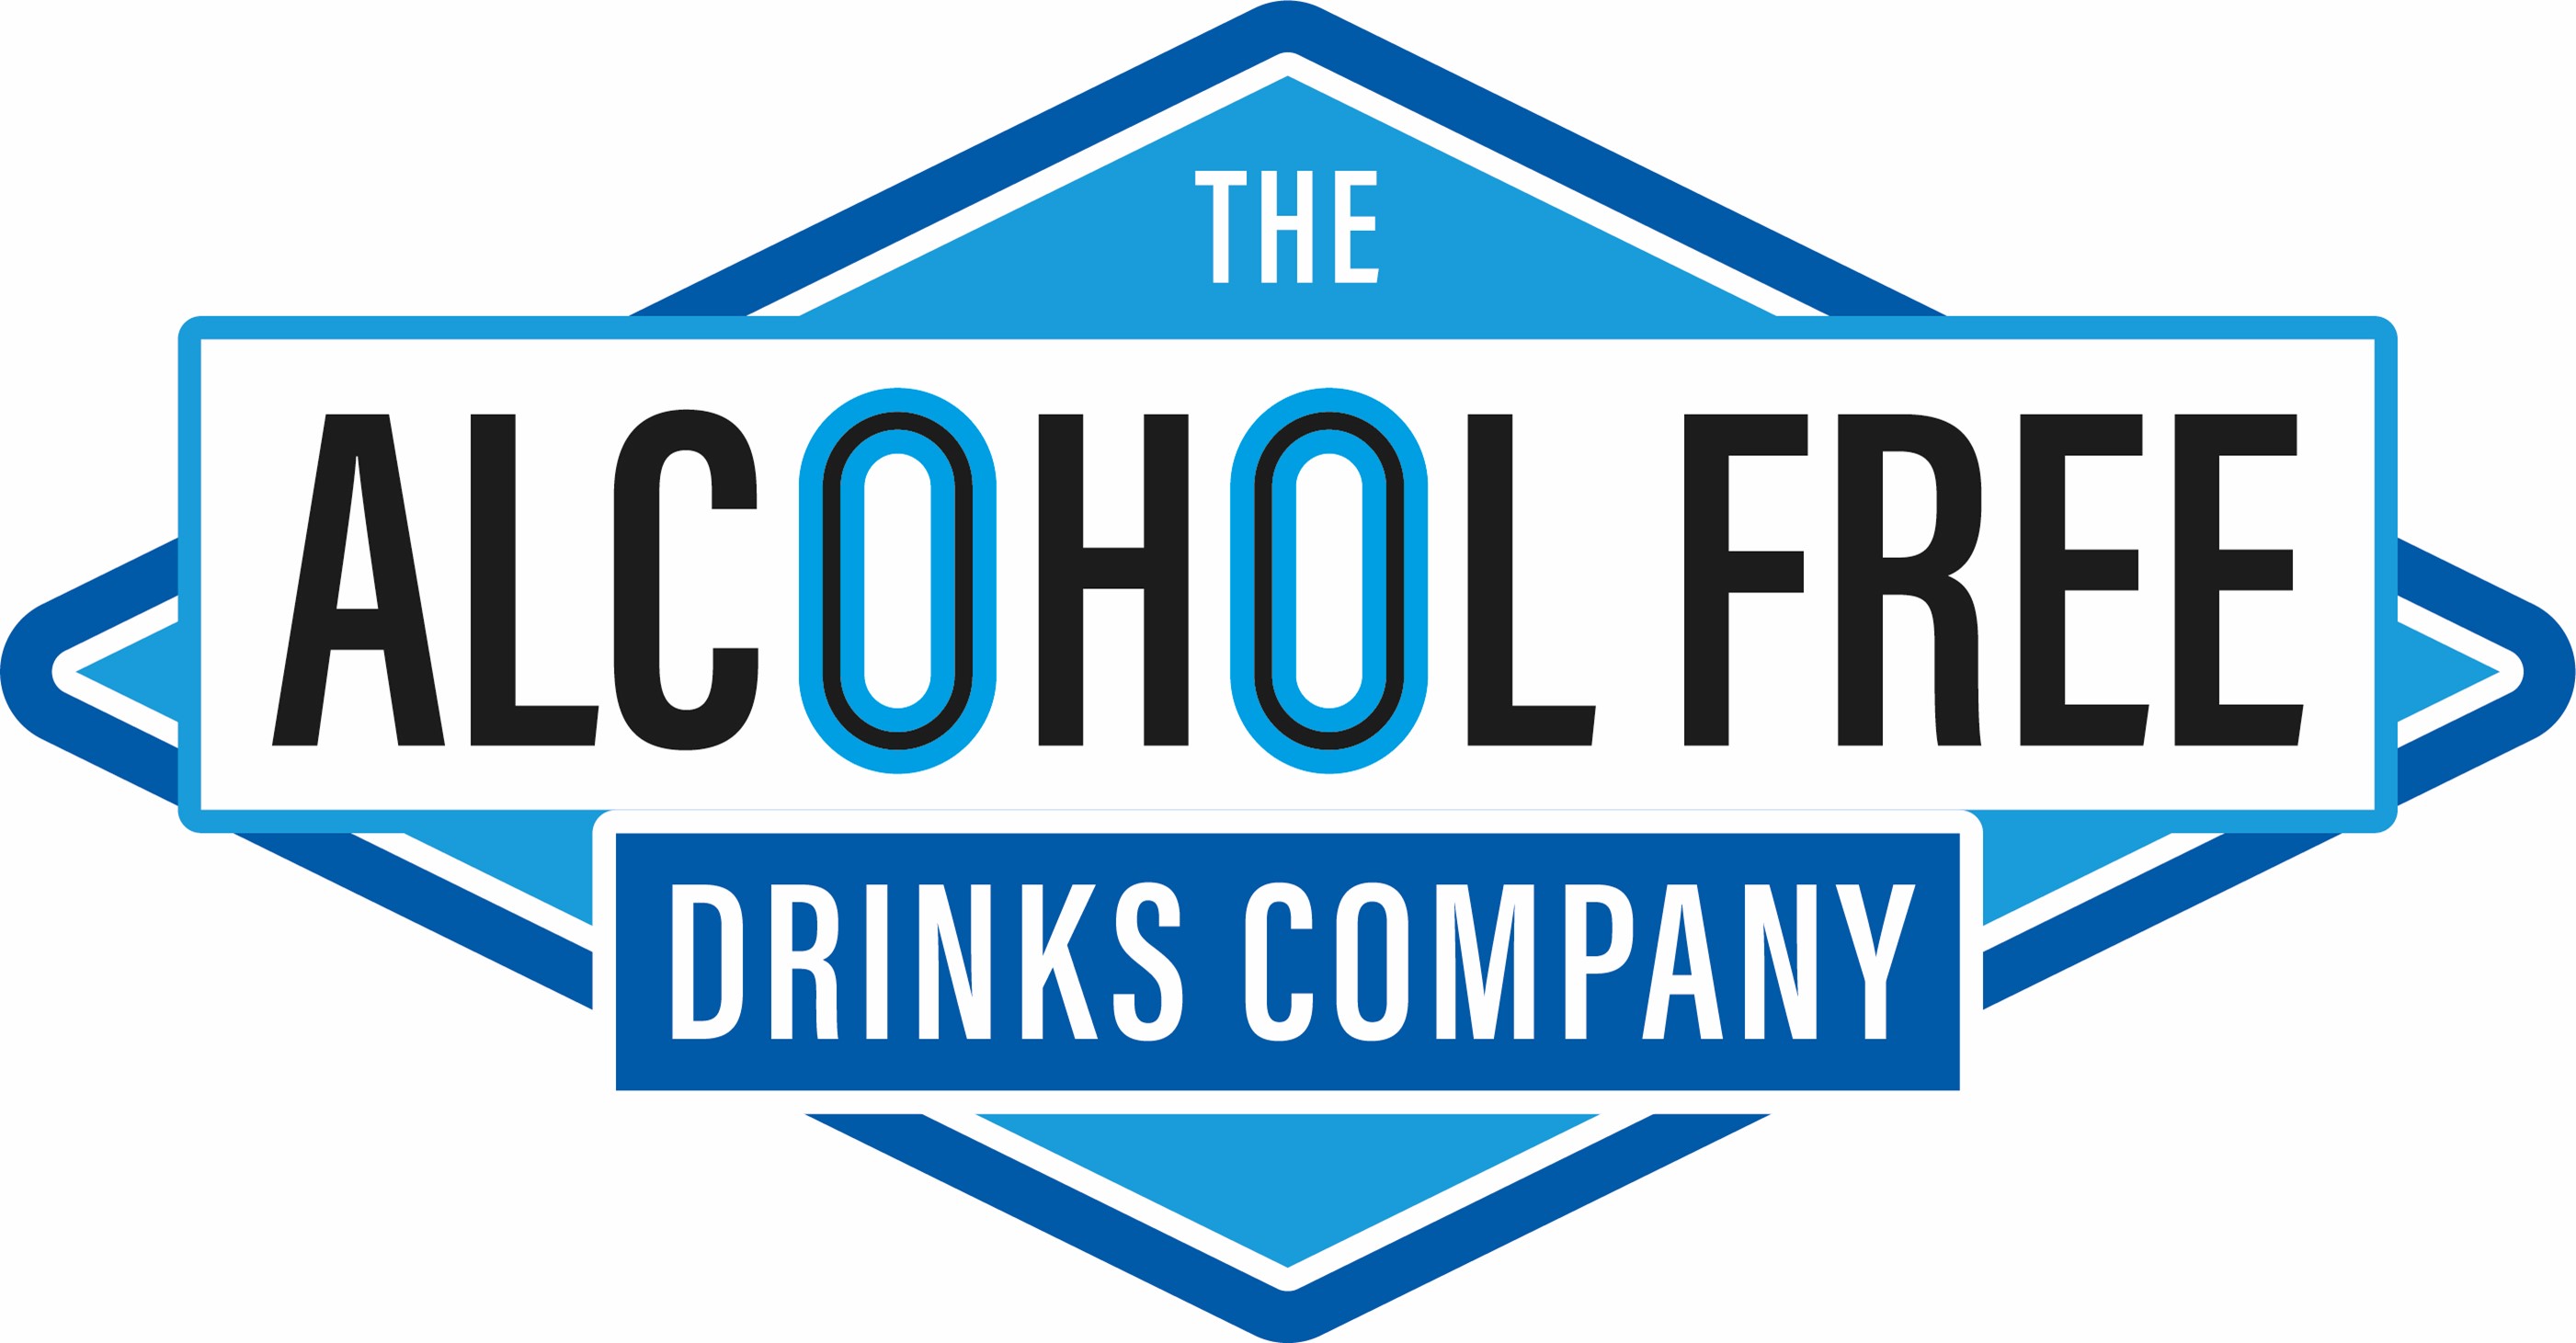 The Alcohol Free Drinks Company image.